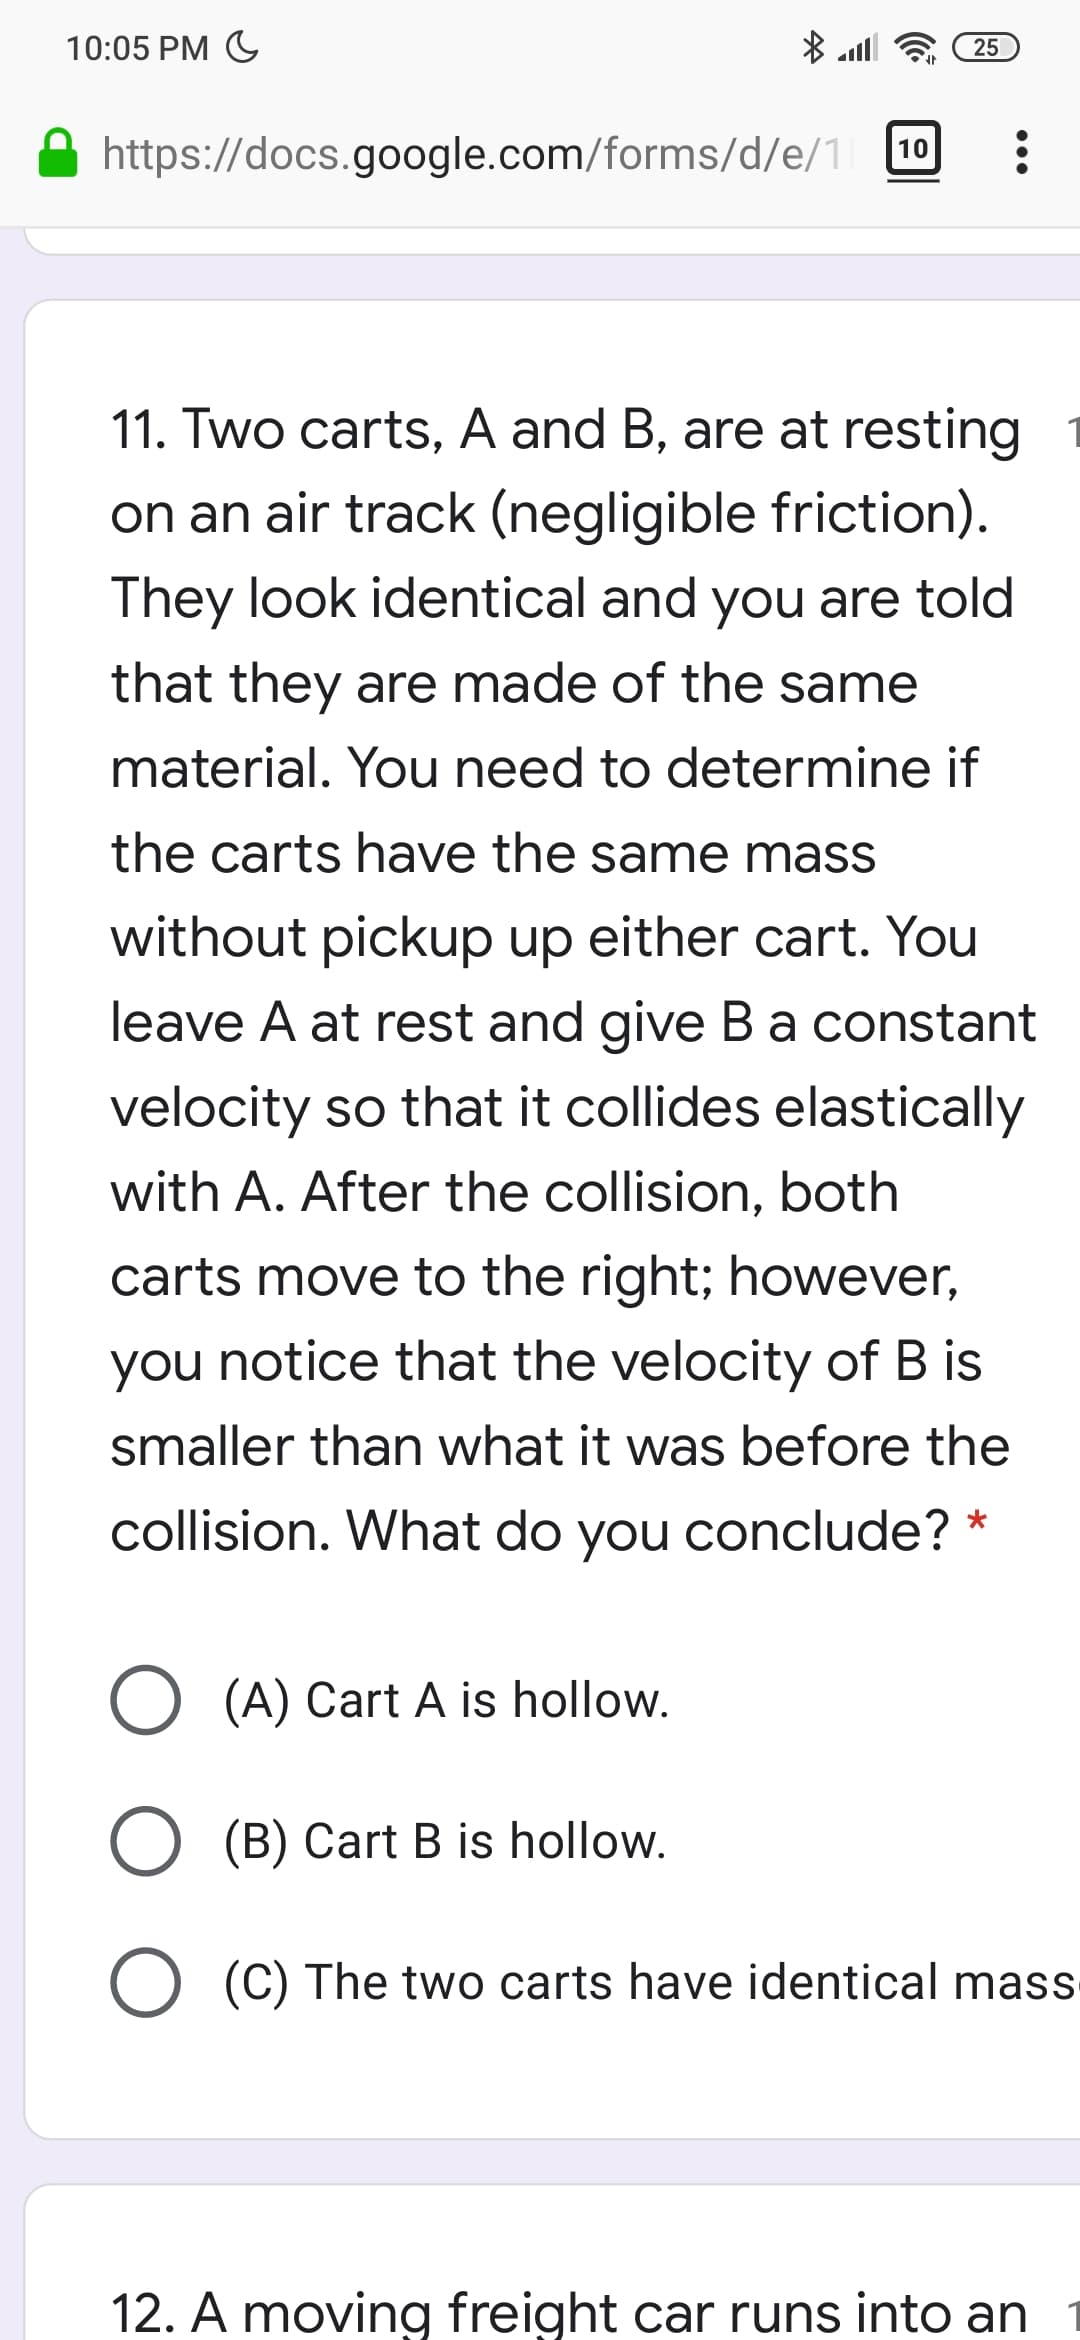 10:05 PM G
25
https://docs.google.com/forms/d/e/1 10
11. Two carts, A and B, are at resting
on an air track (negligible friction).
They look identical and you are told
that they are made of the same
material. You need to determine if
the carts have the same mass
without pickup up either cart. You
leave A at rest and give Ba constant
velocity so that it collides elastically
with A. After the collision, both
carts move to the right; however,
you notice that the velocity of B is
smaller than what it was before the
collision. What do you conclude? *
O (A) Cart A is hollow.
(B) Cart B is hollow.
O (C) The two carts have identical mass
12. A moving freight car runs into an
